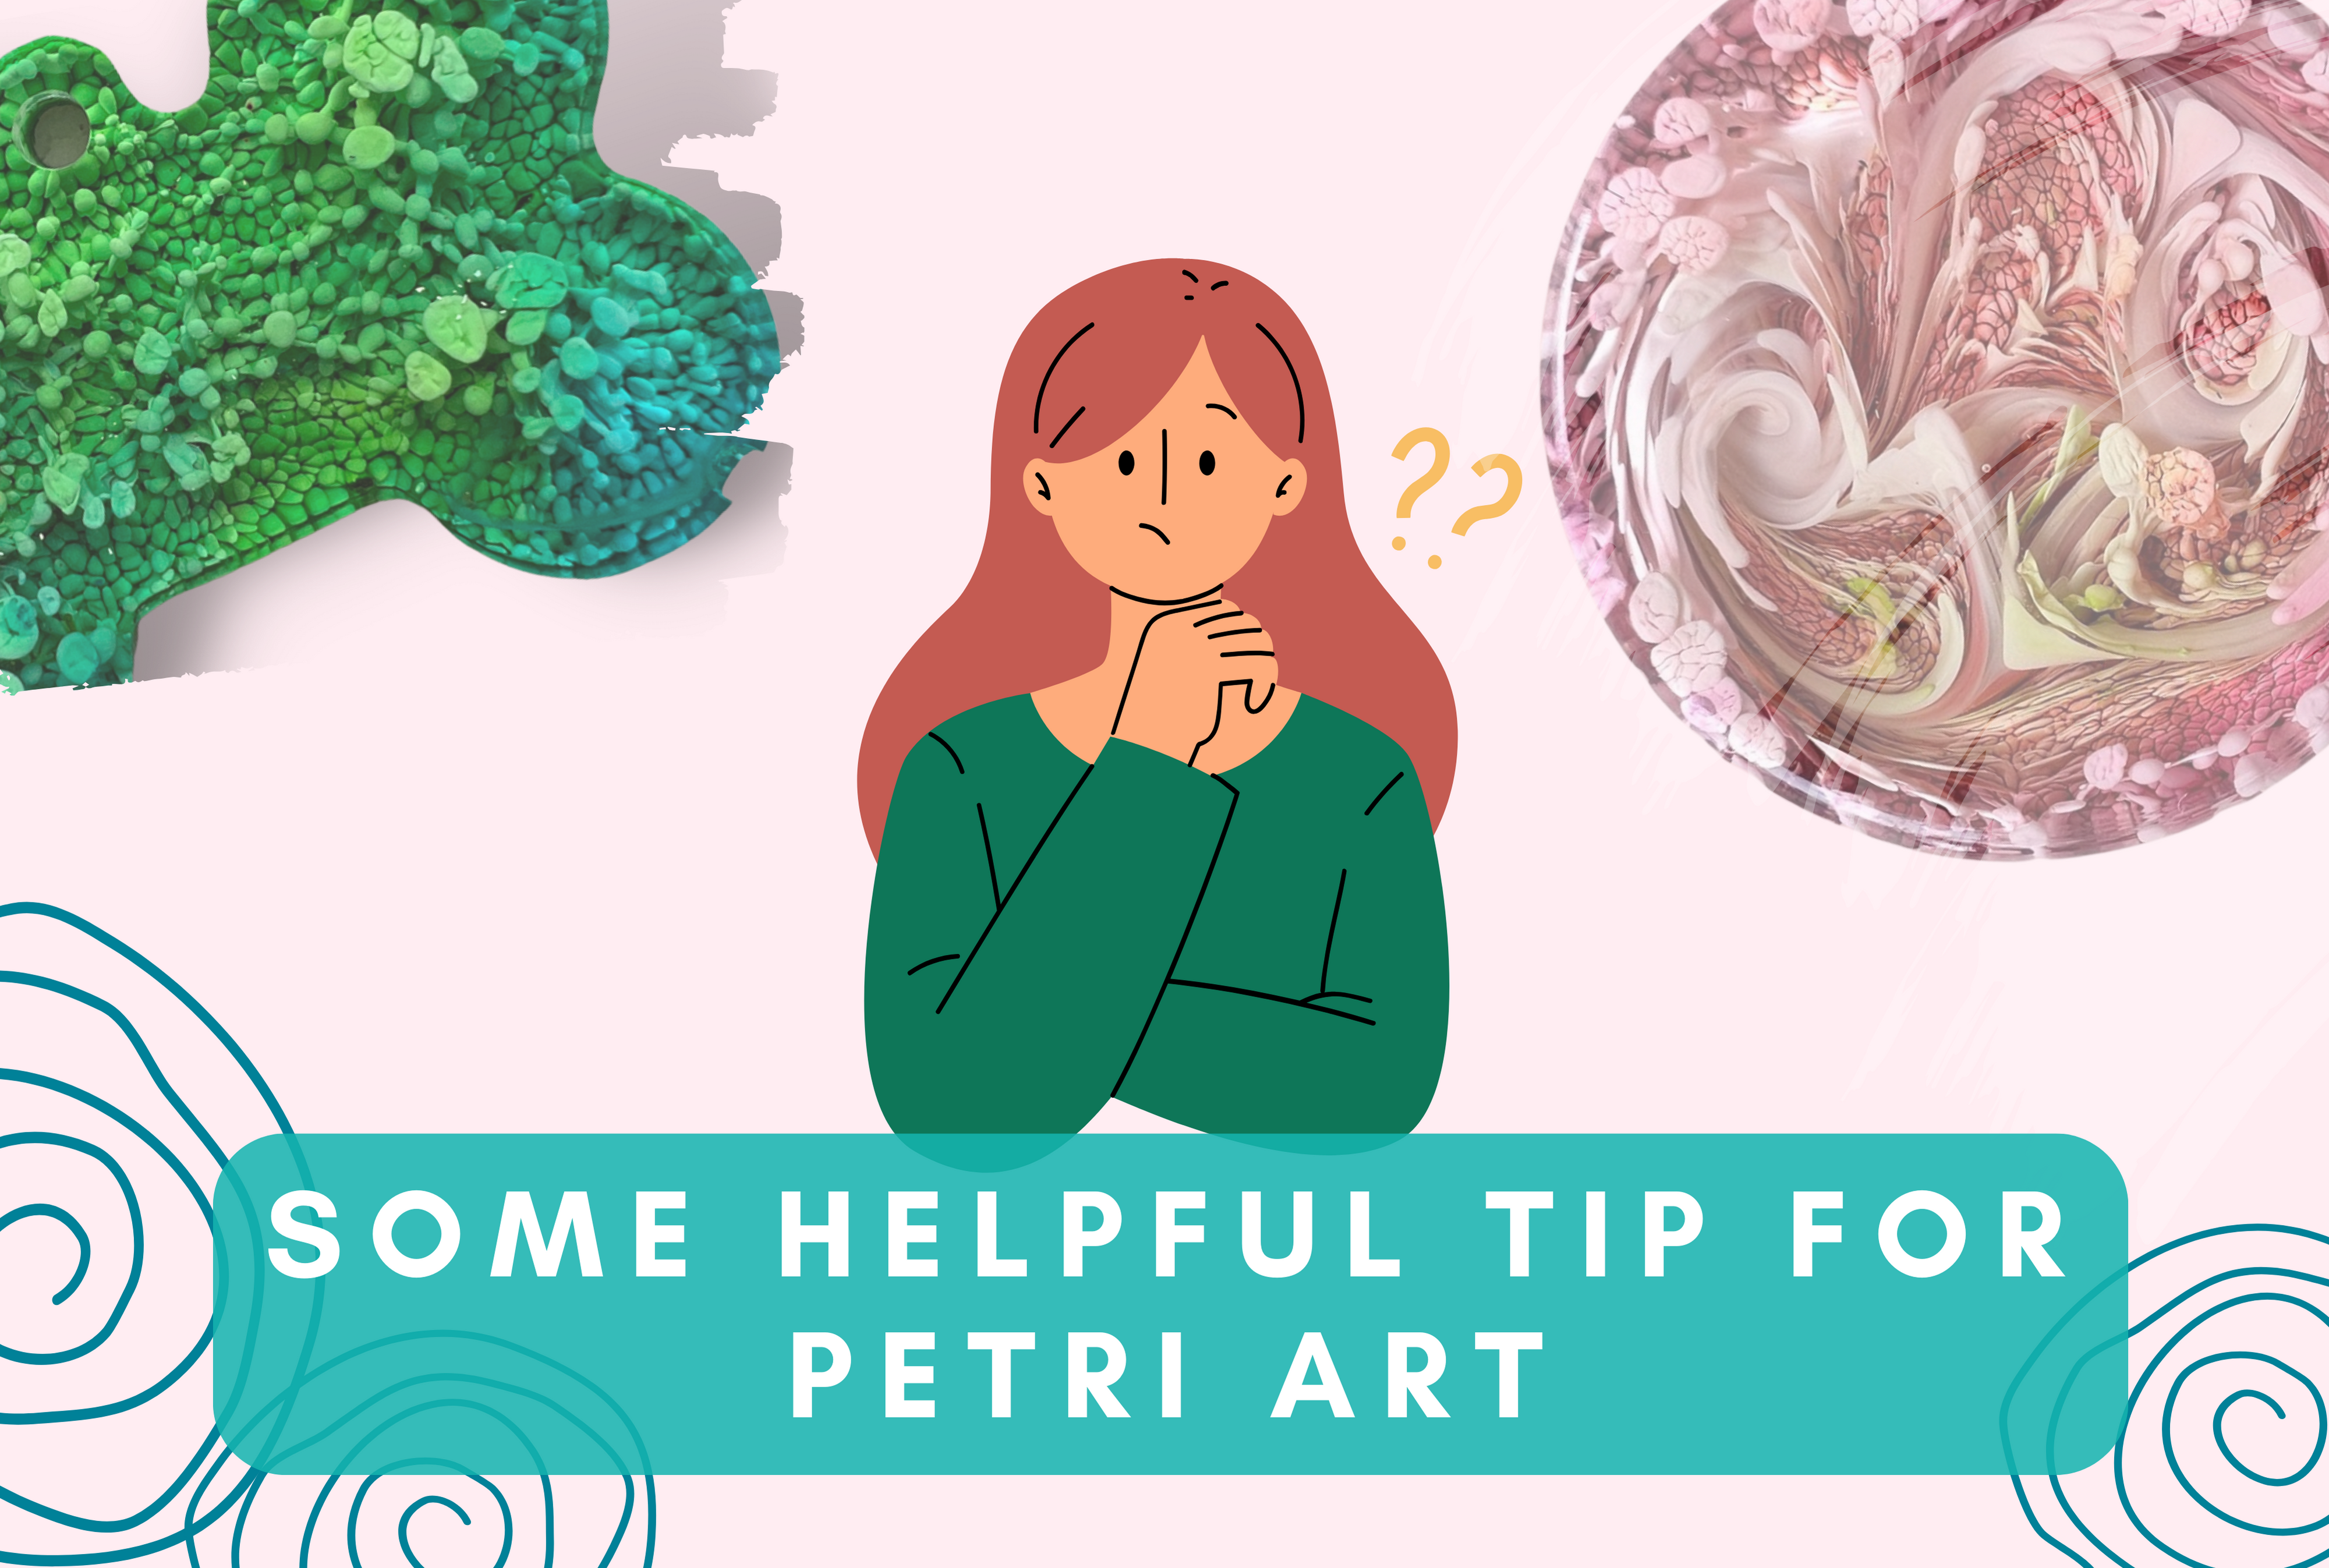 Some helpful tip for Petri Art